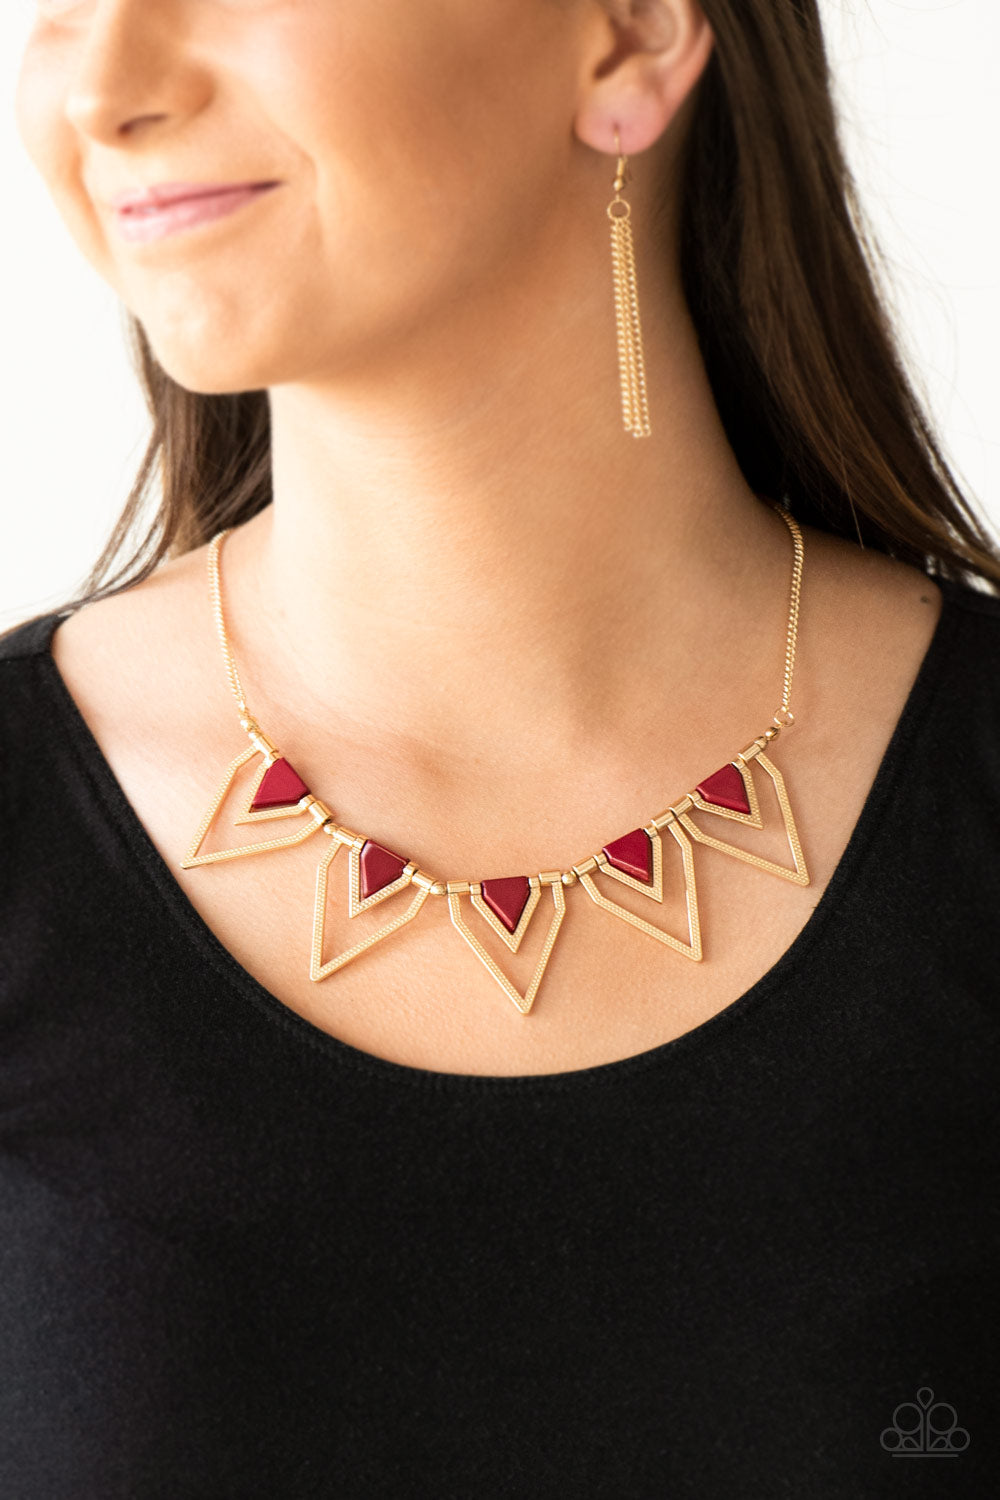 The Pack Leader Necklace - Red